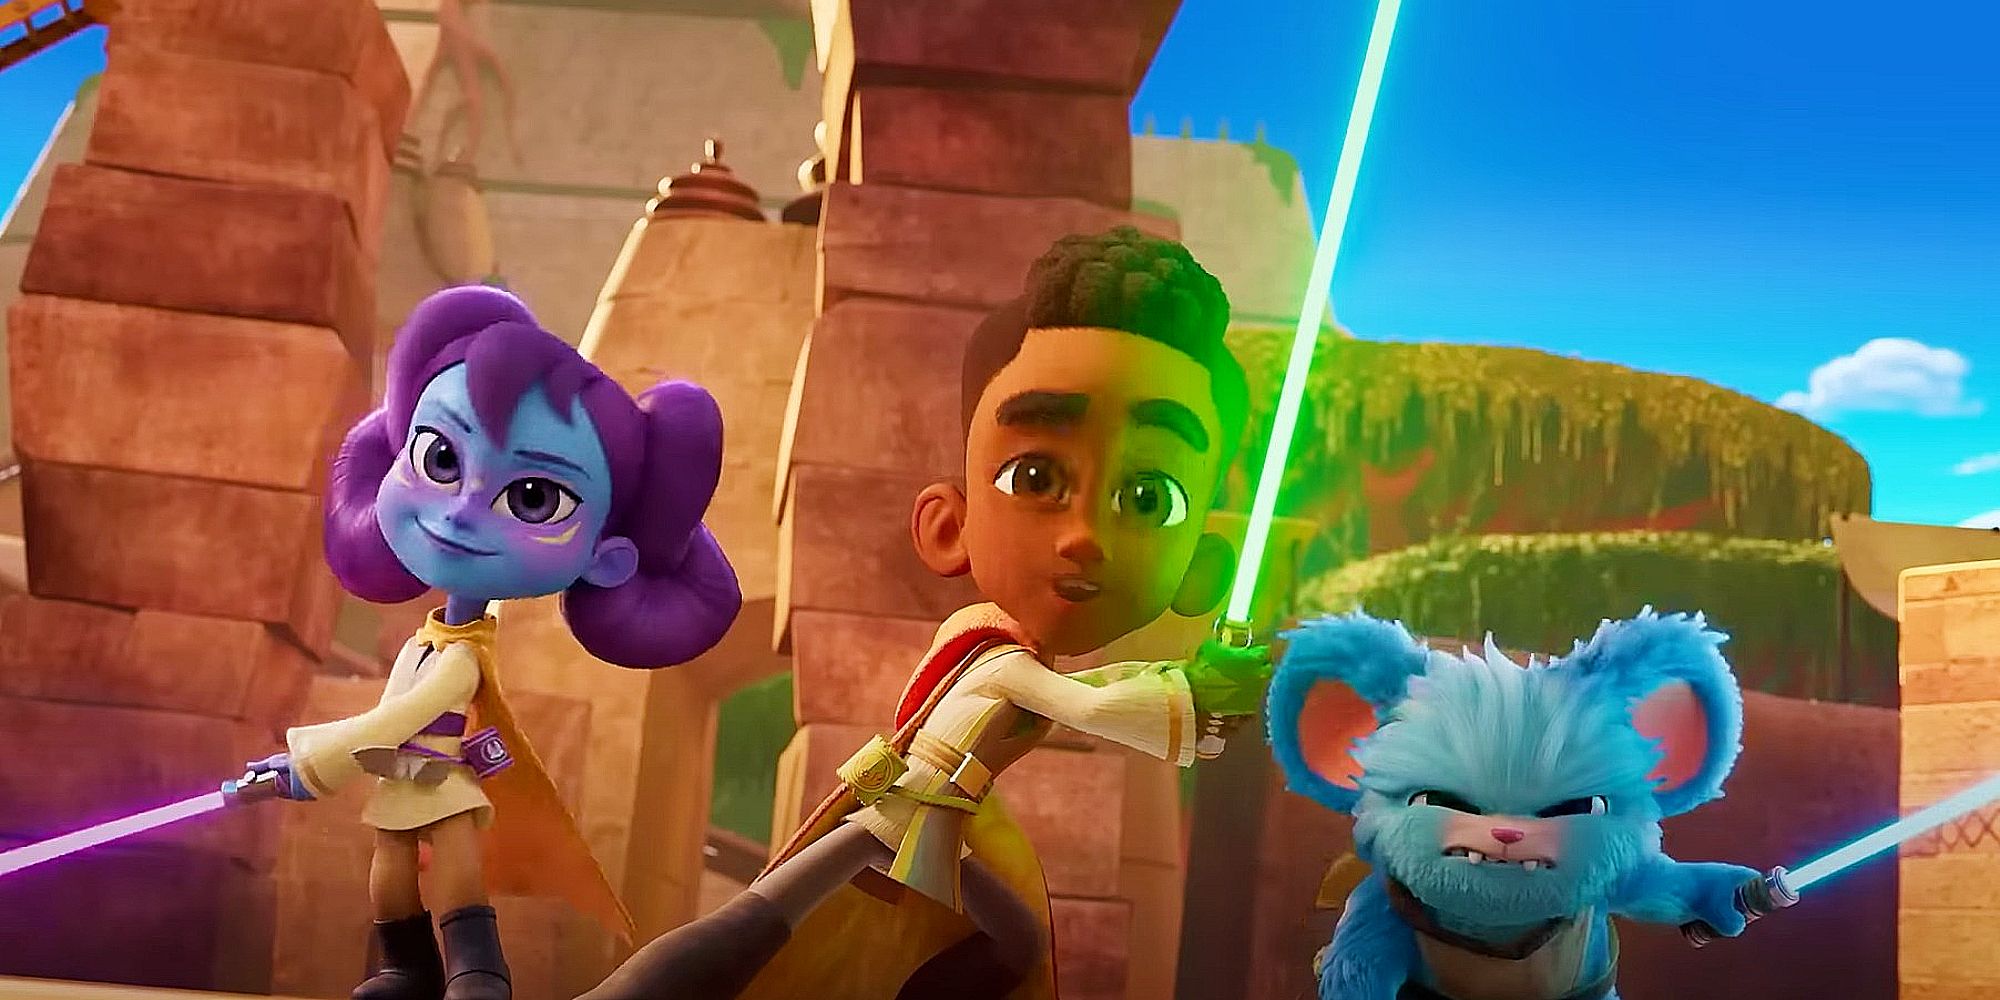 Disney+ and Disney Junior Set to Release 'Young Jedi Adventures